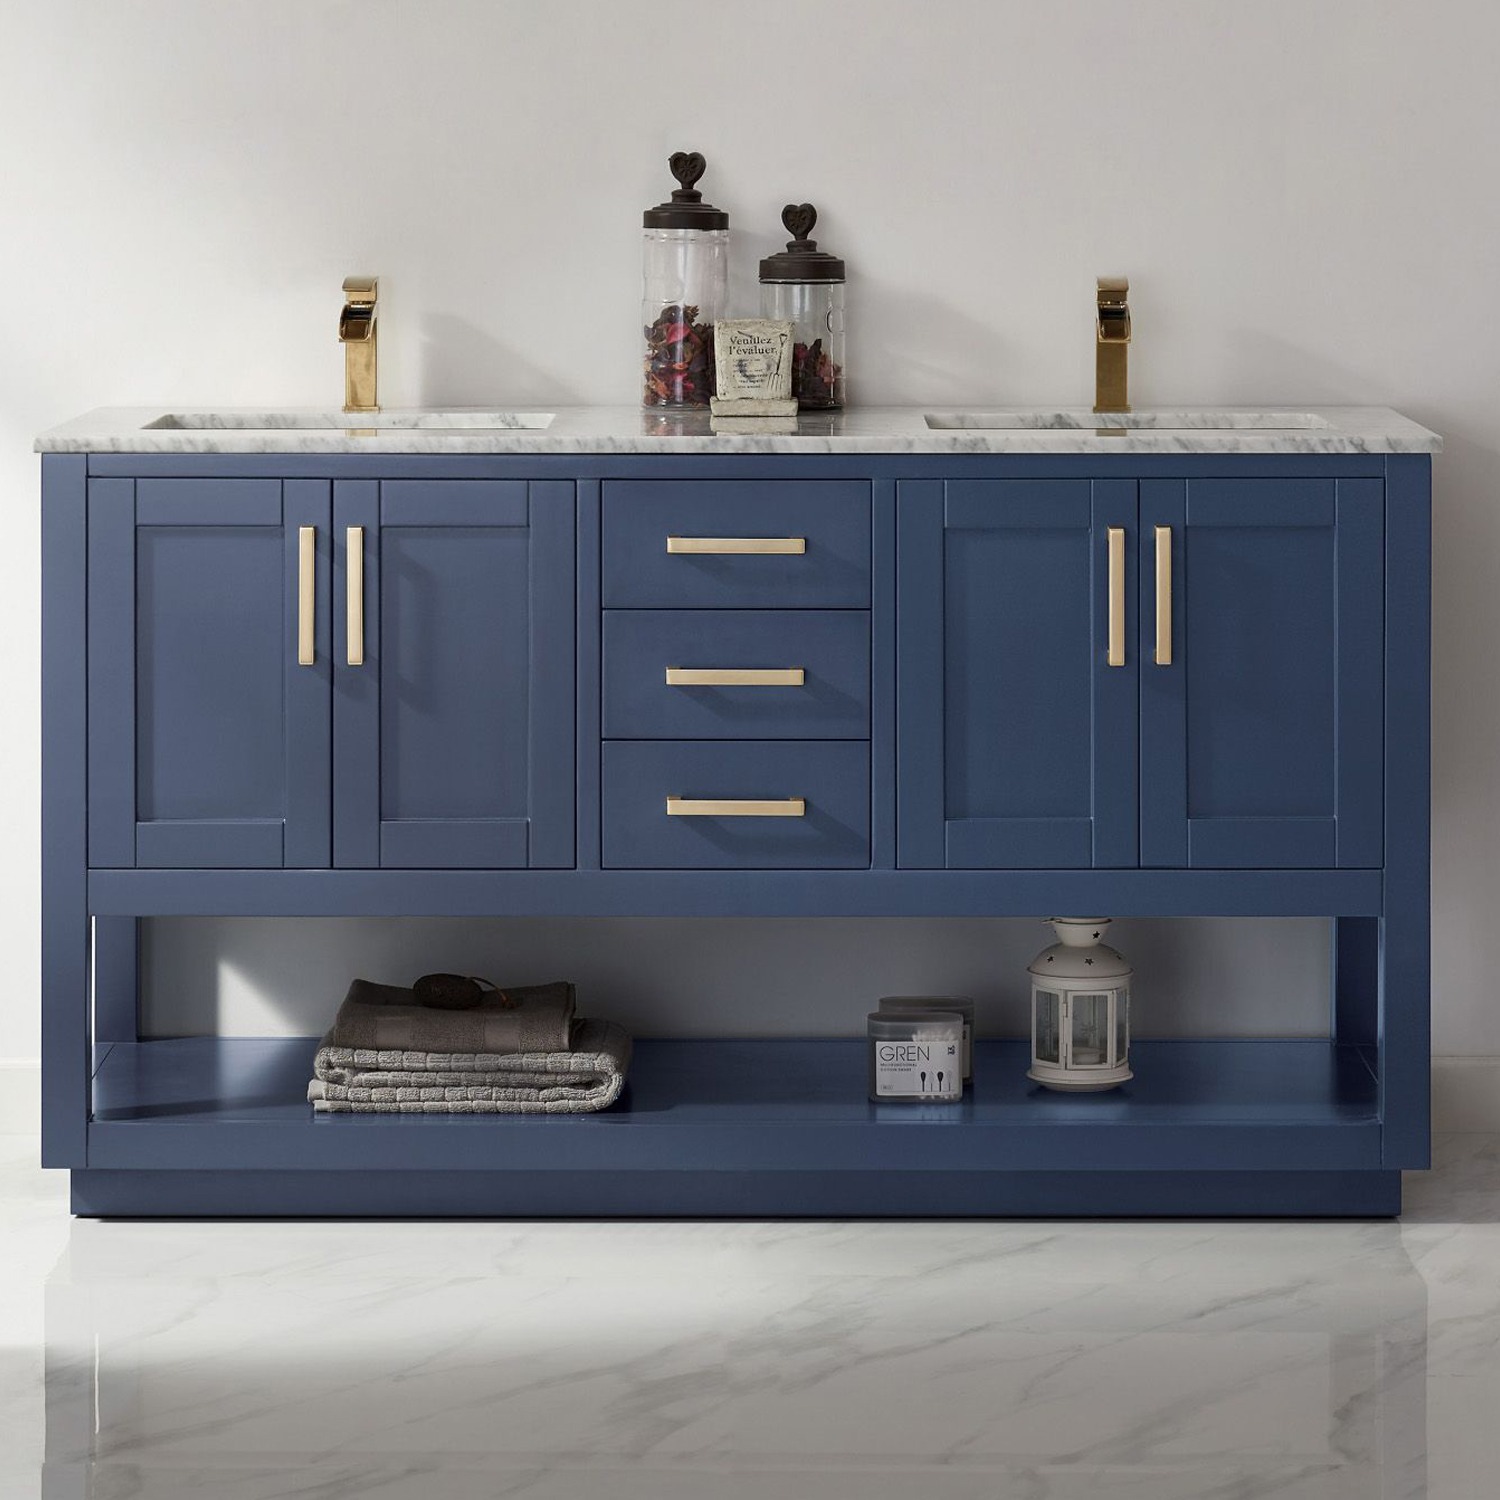 Issac Edwards Collection 60" Double Bathroom Vanity Set in Royal Blue and Carrara White Marble Countertop with Mirror Option